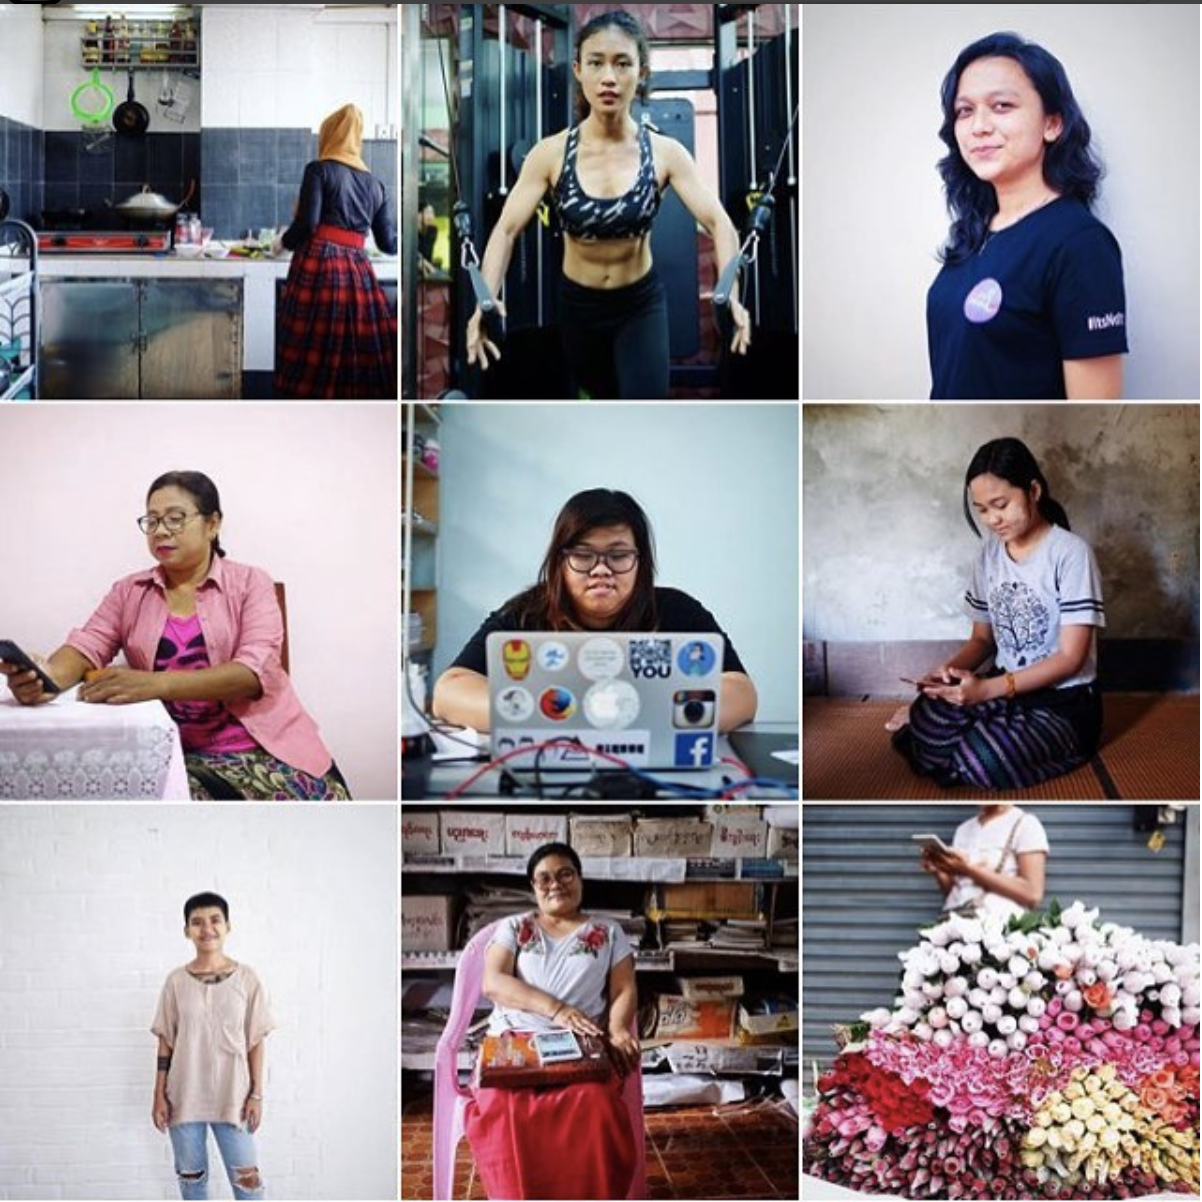  In Myanmar, Facebook has provided women new opportunities for business, activism and organizing, while also being a hotbed of harassment.  I contributed 11 portraits to The Lily that show women in Myanmar who see the good, and the bad, that Facebook